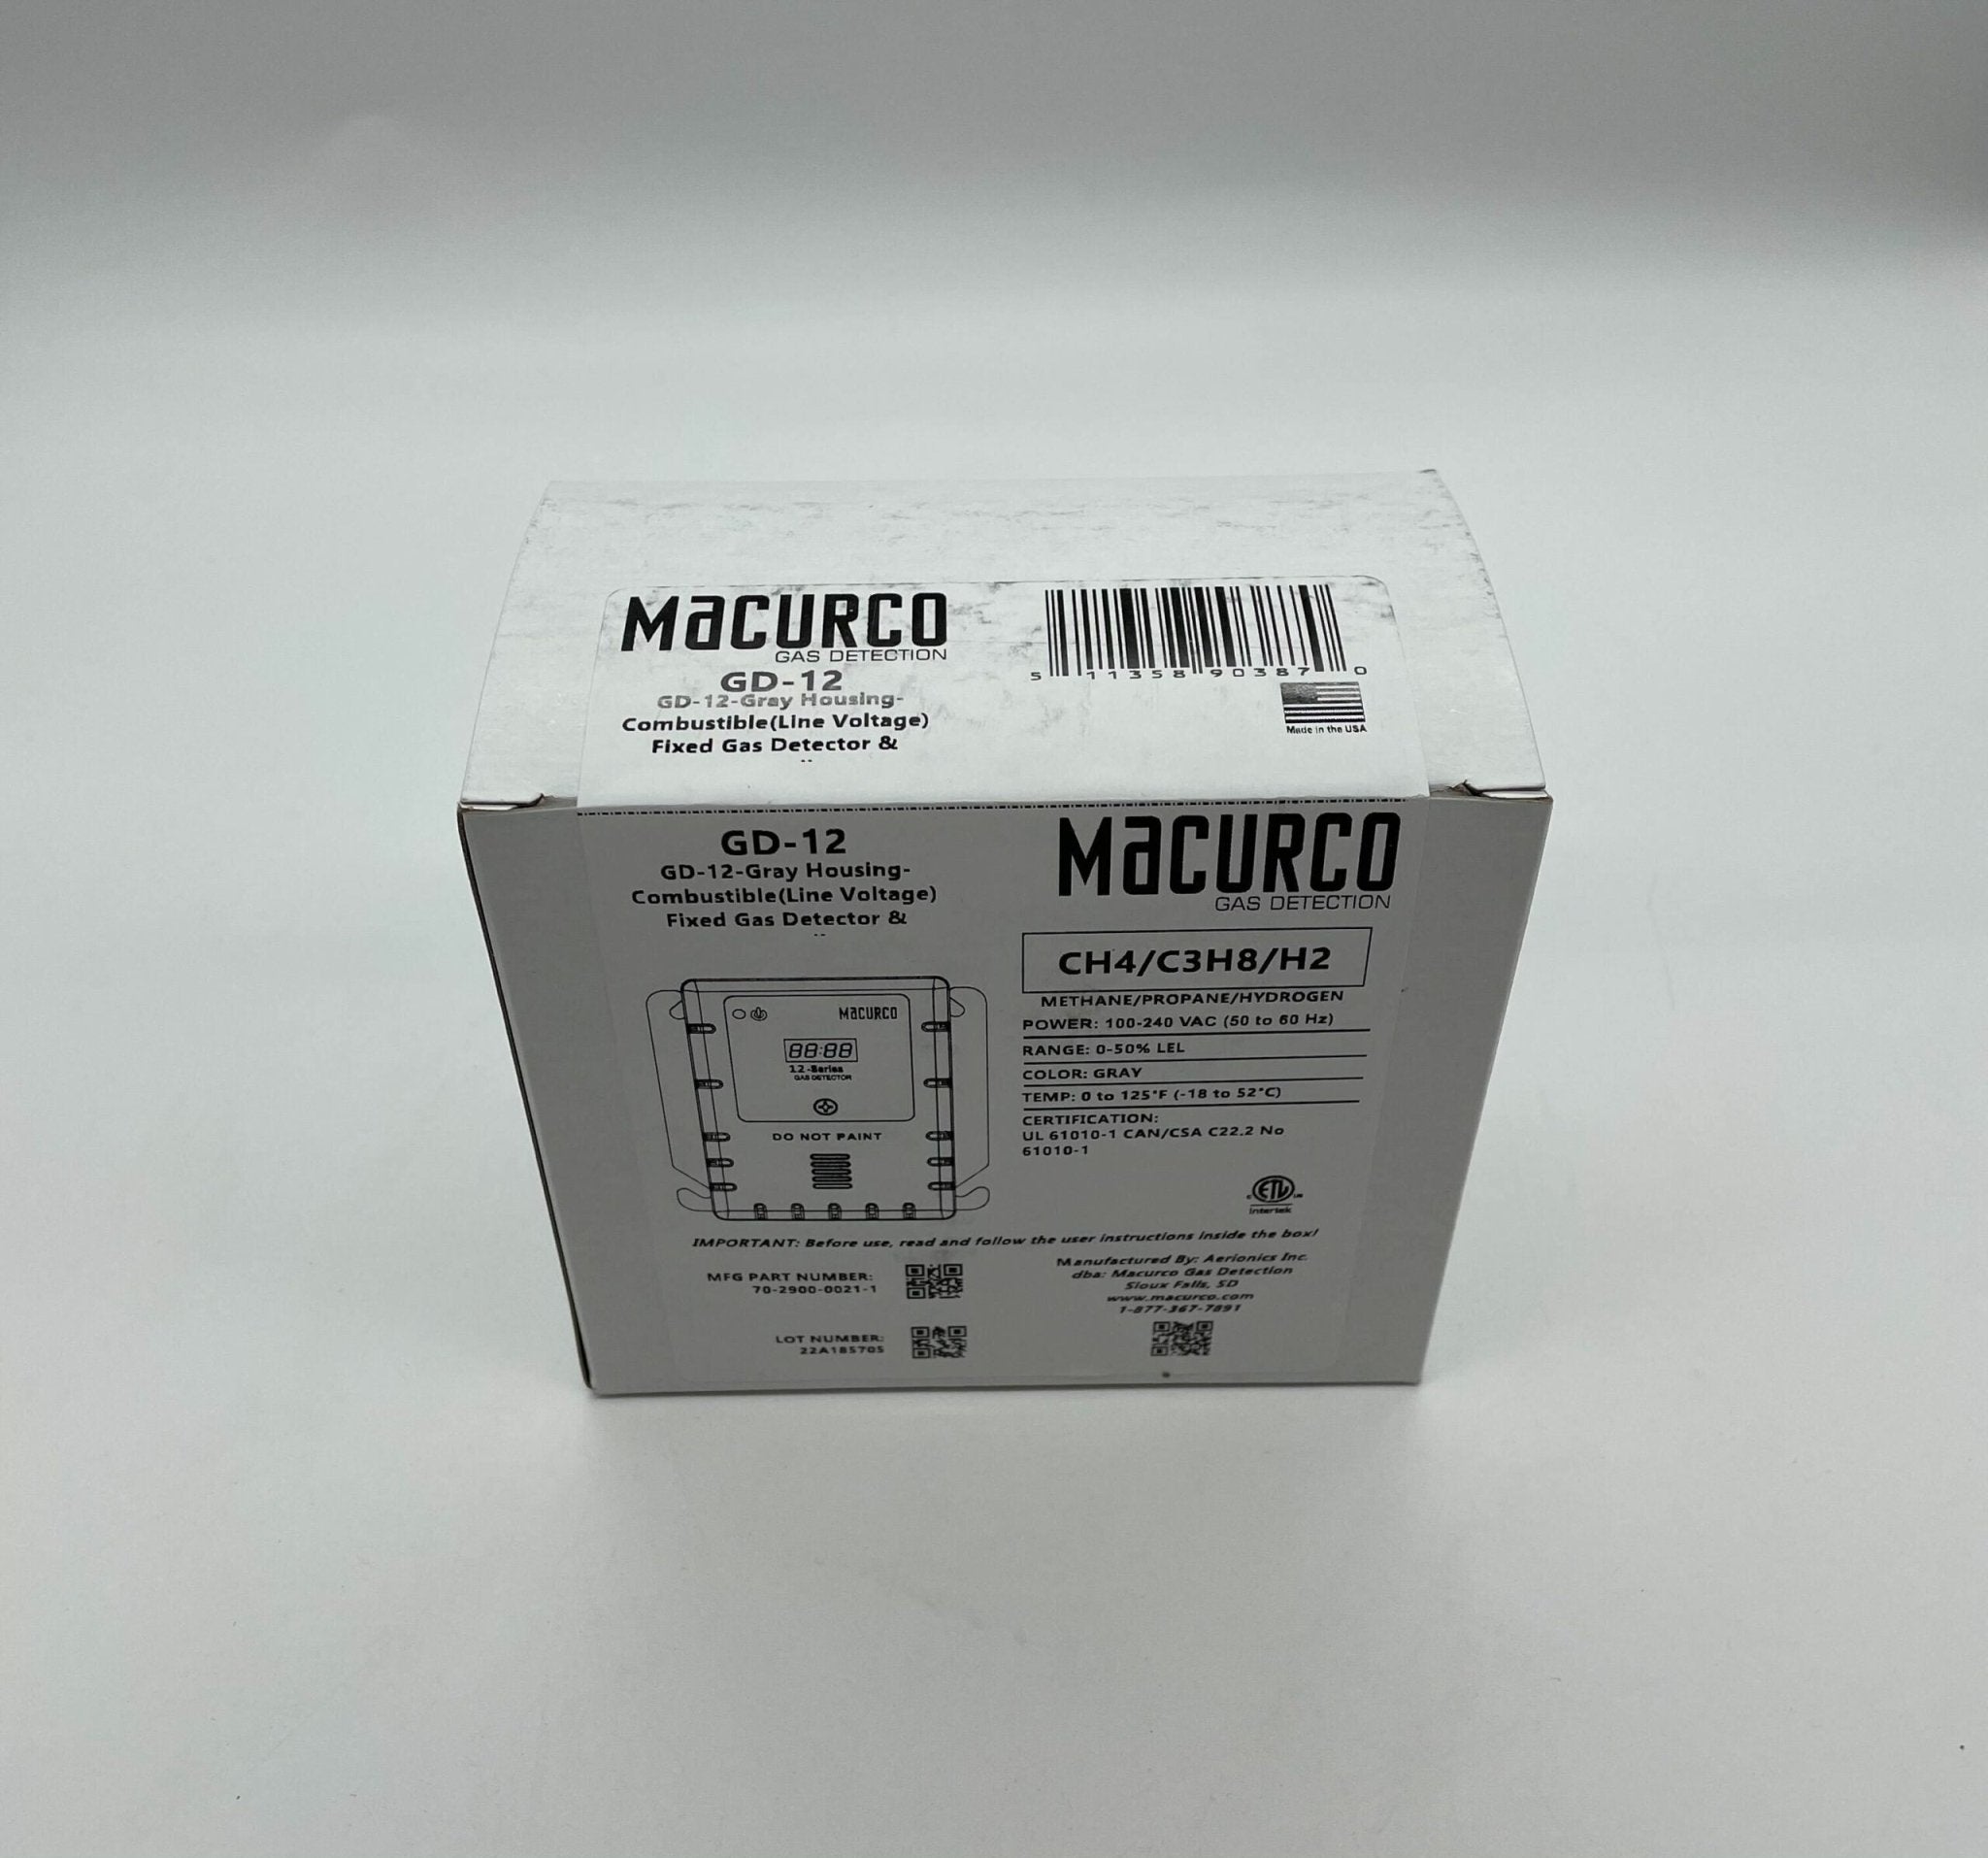 Macurco GD-12 - The Fire Alarm Supplier